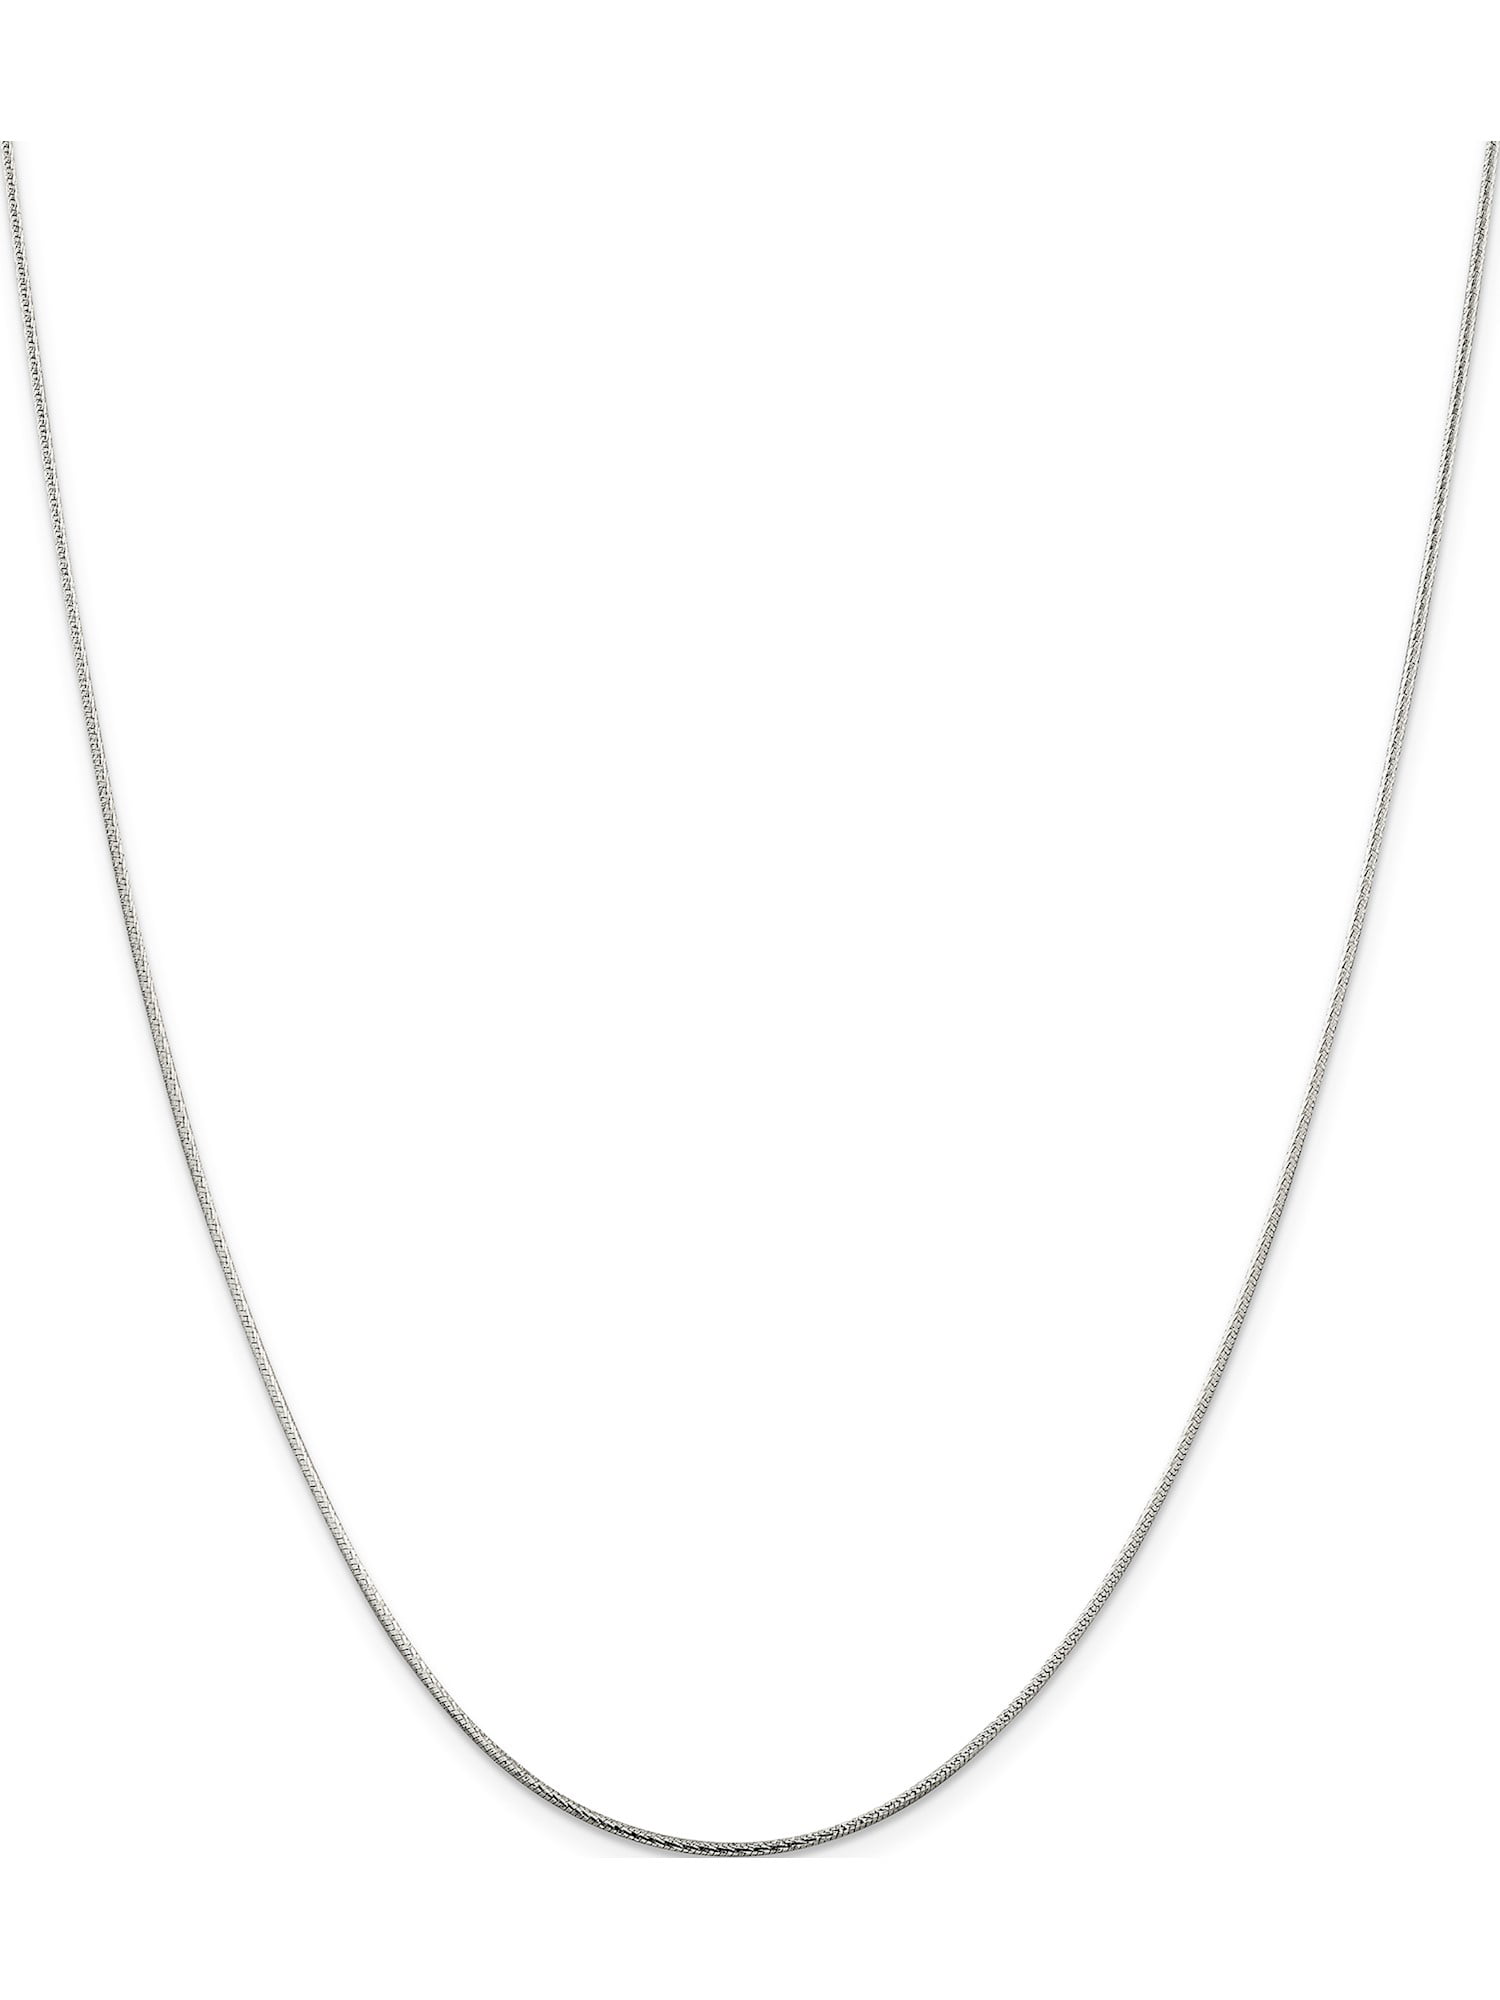 Beautiful Sterling Silver 1.25mm Round Snake Chain